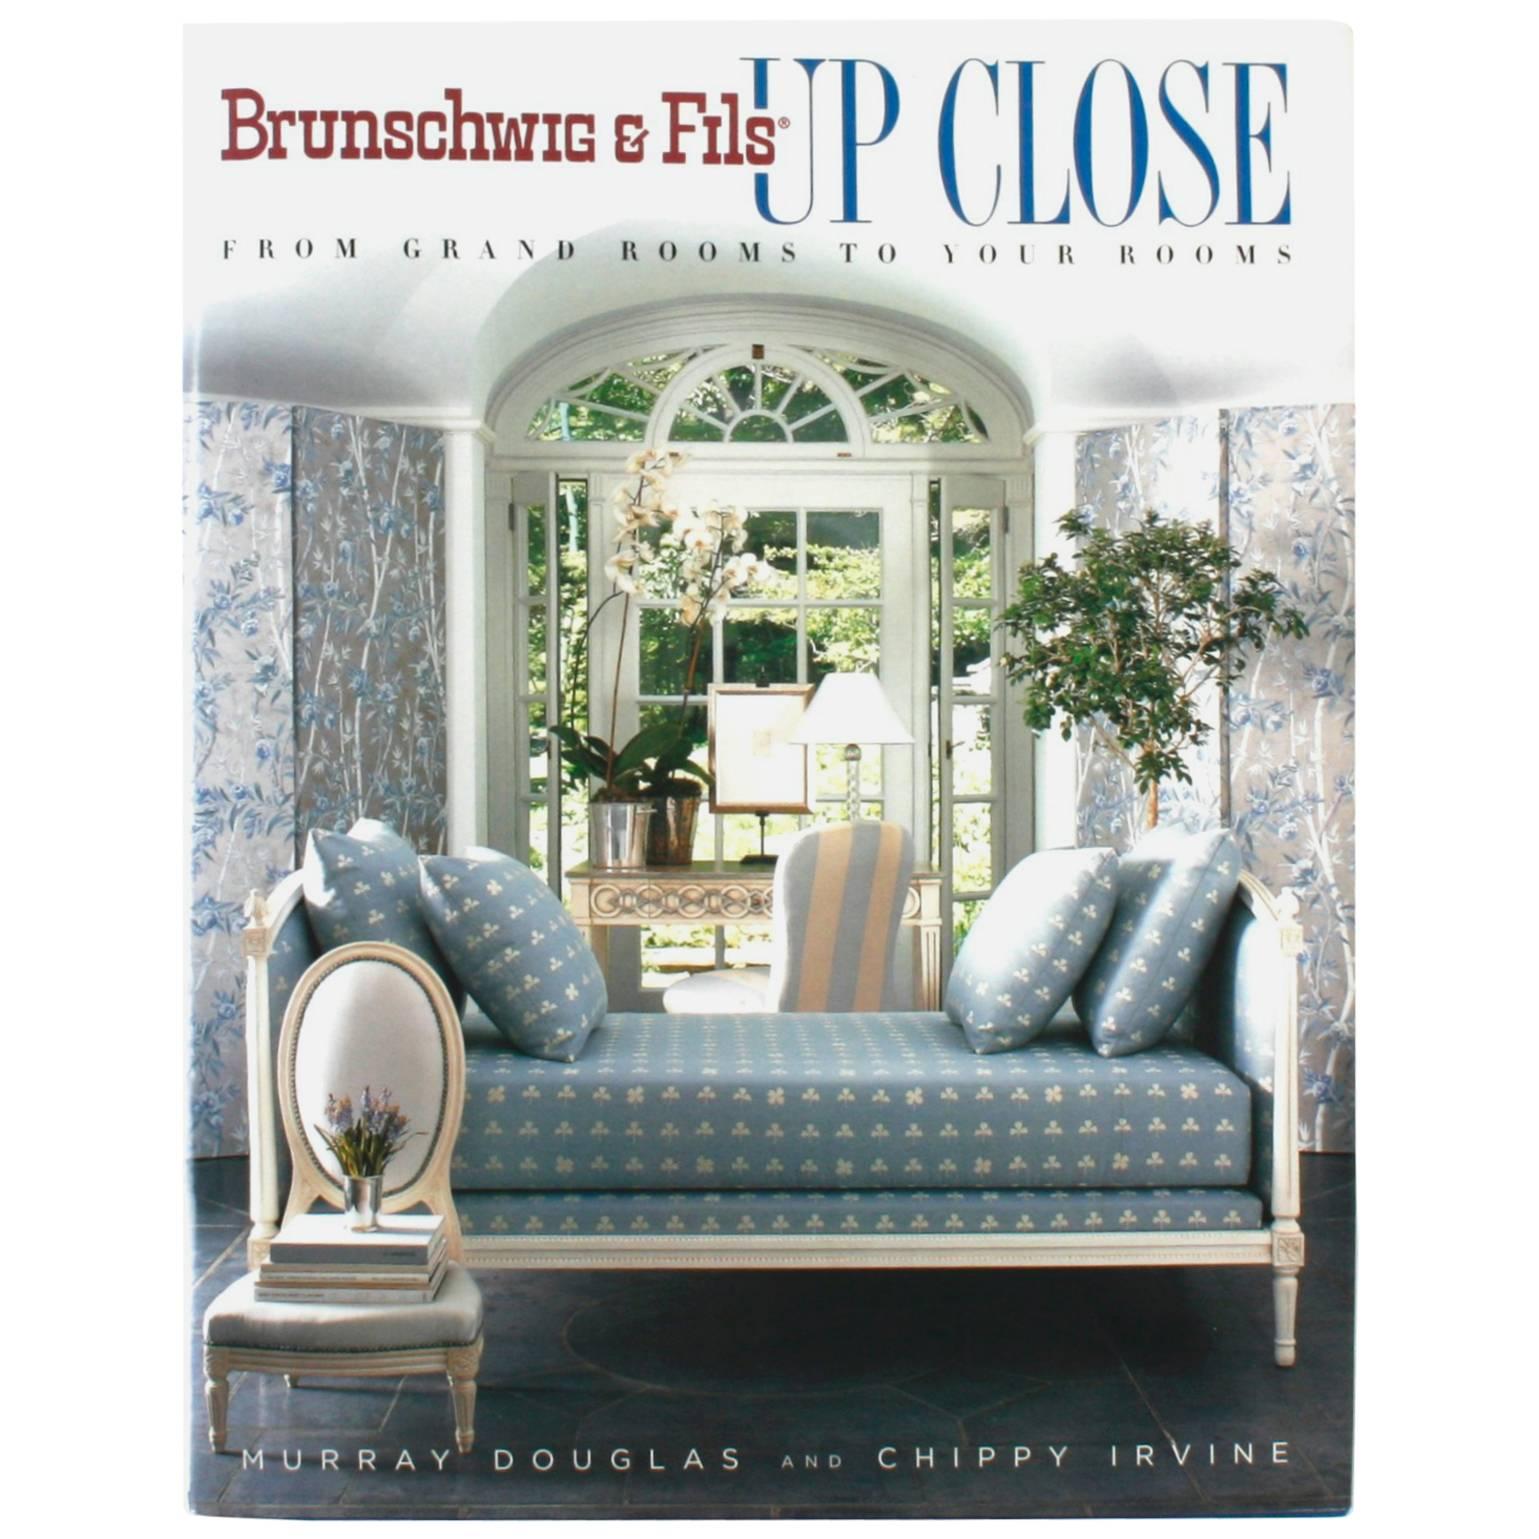 Brunschwig & Fils Up Close, from Grand Rooms to Your Rooms, First Edition For Sale